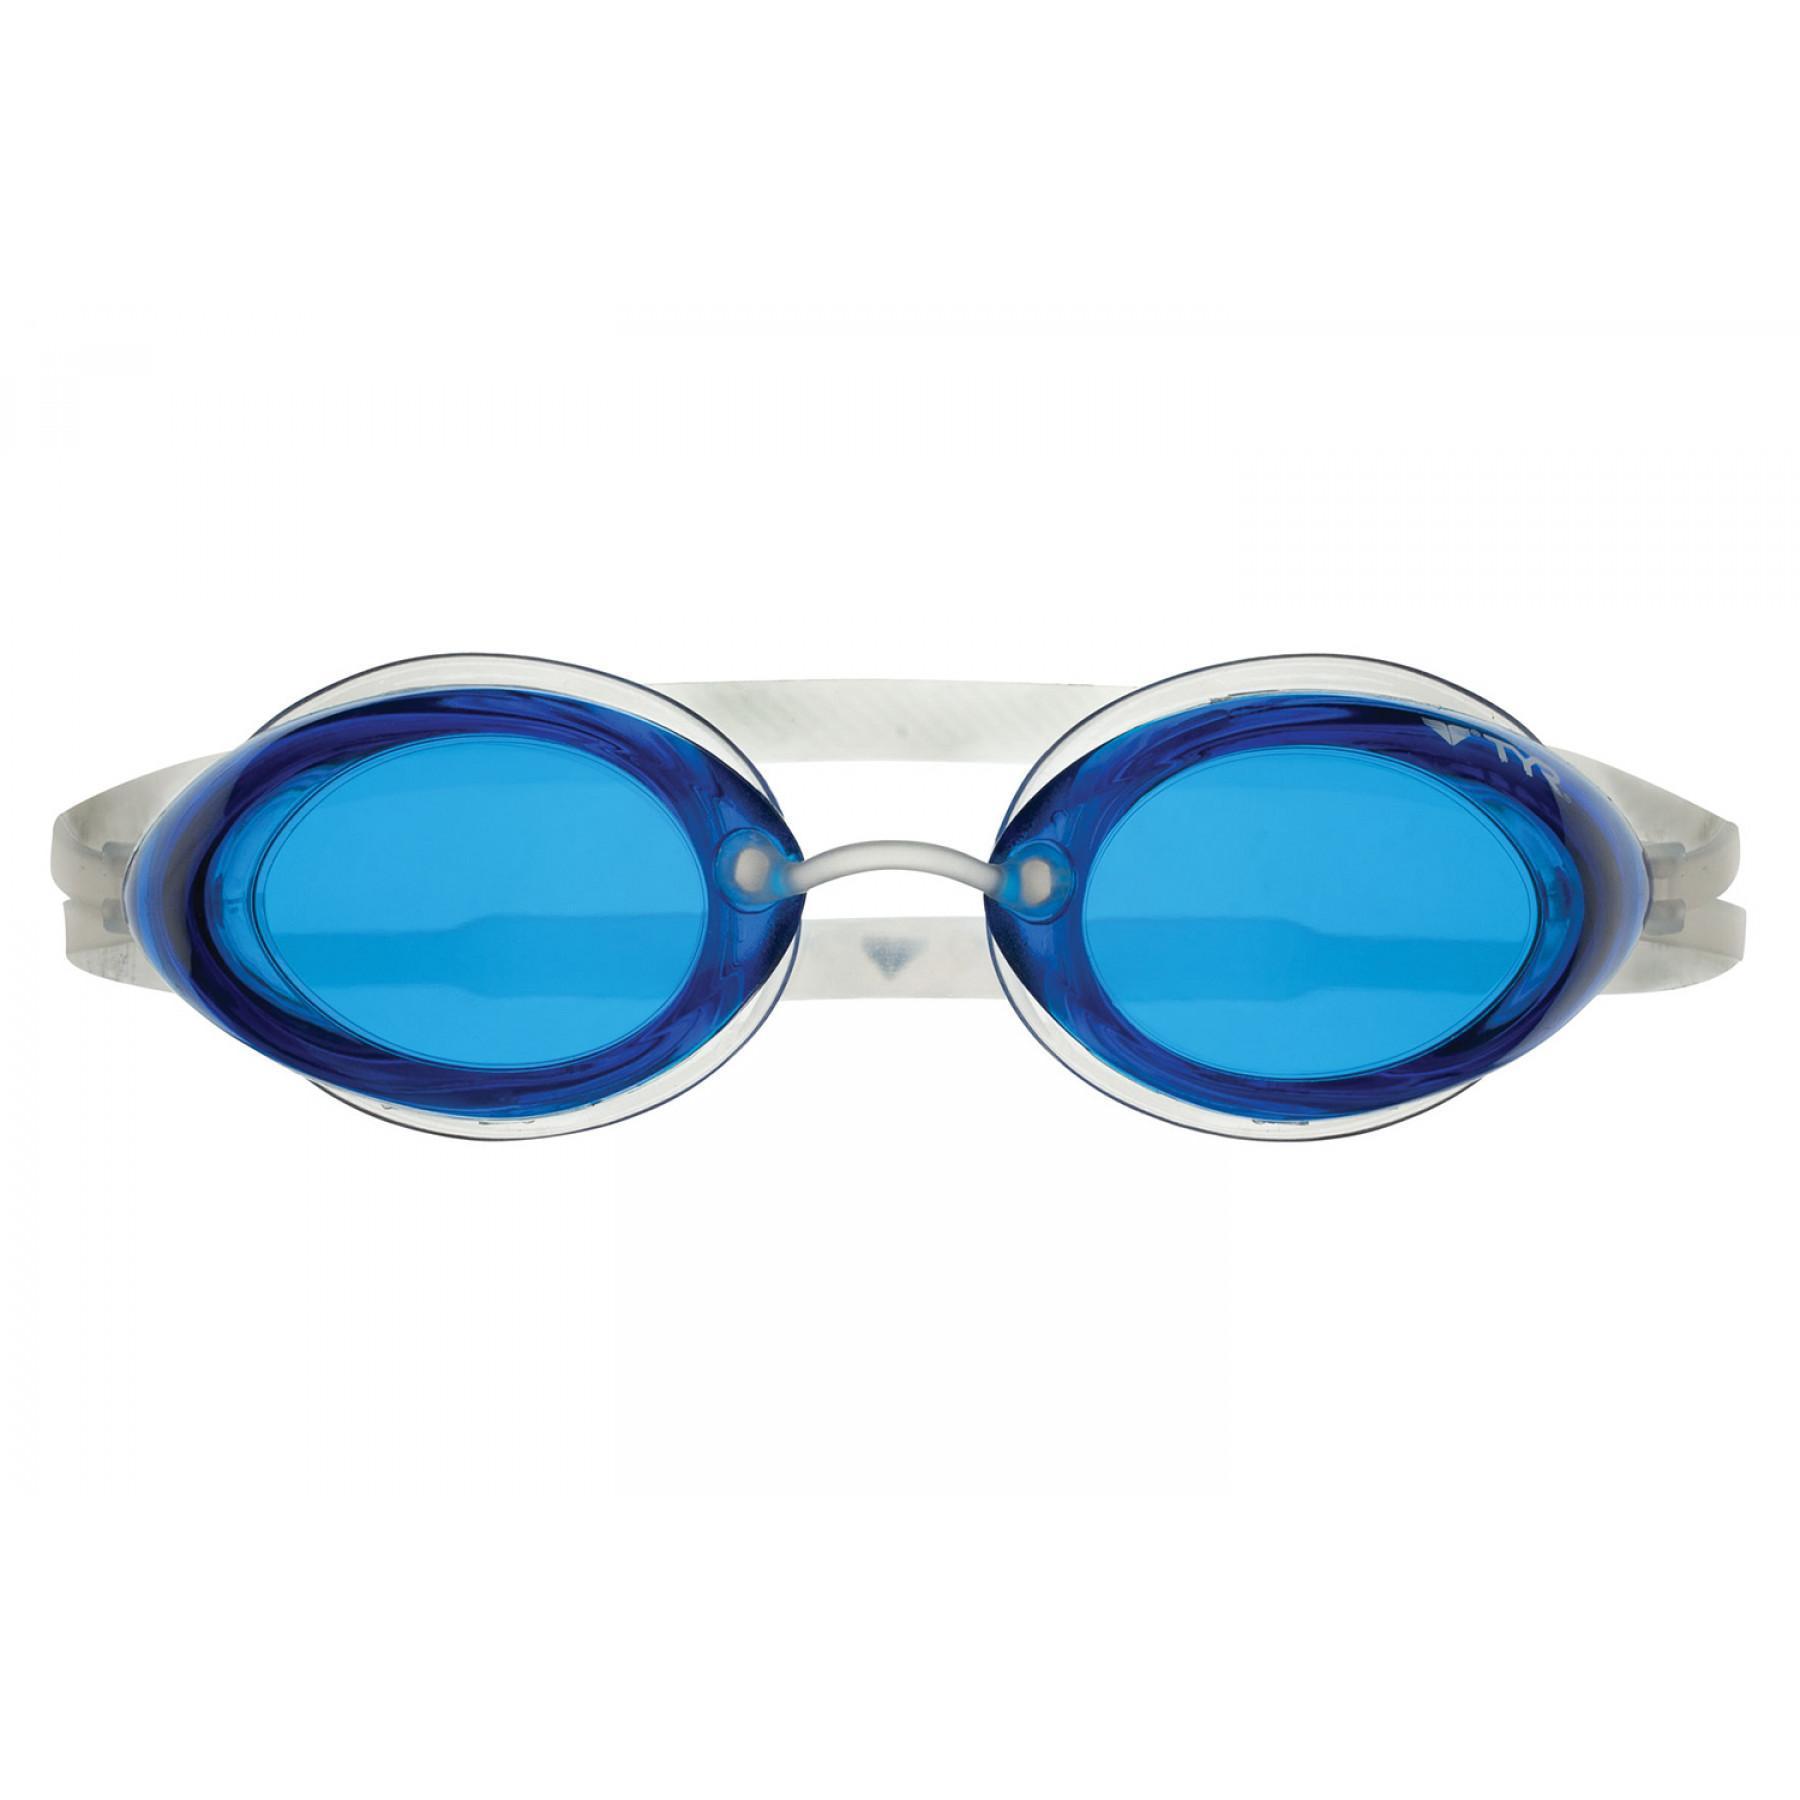 Schwimmbrille TYR Tracer racing